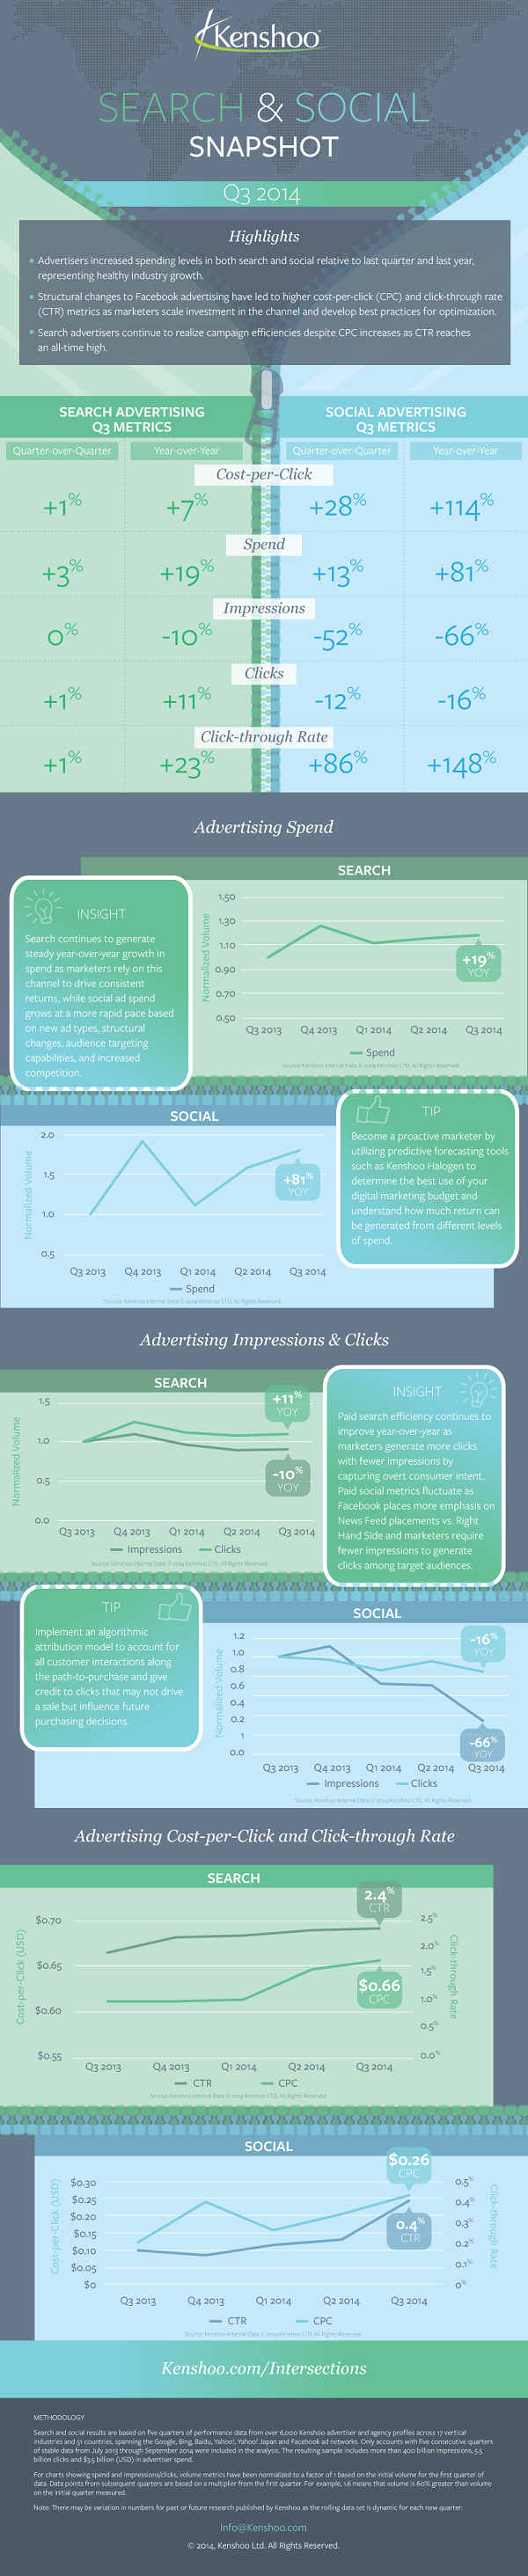 2014-Q3-Search-and-Social-Trends